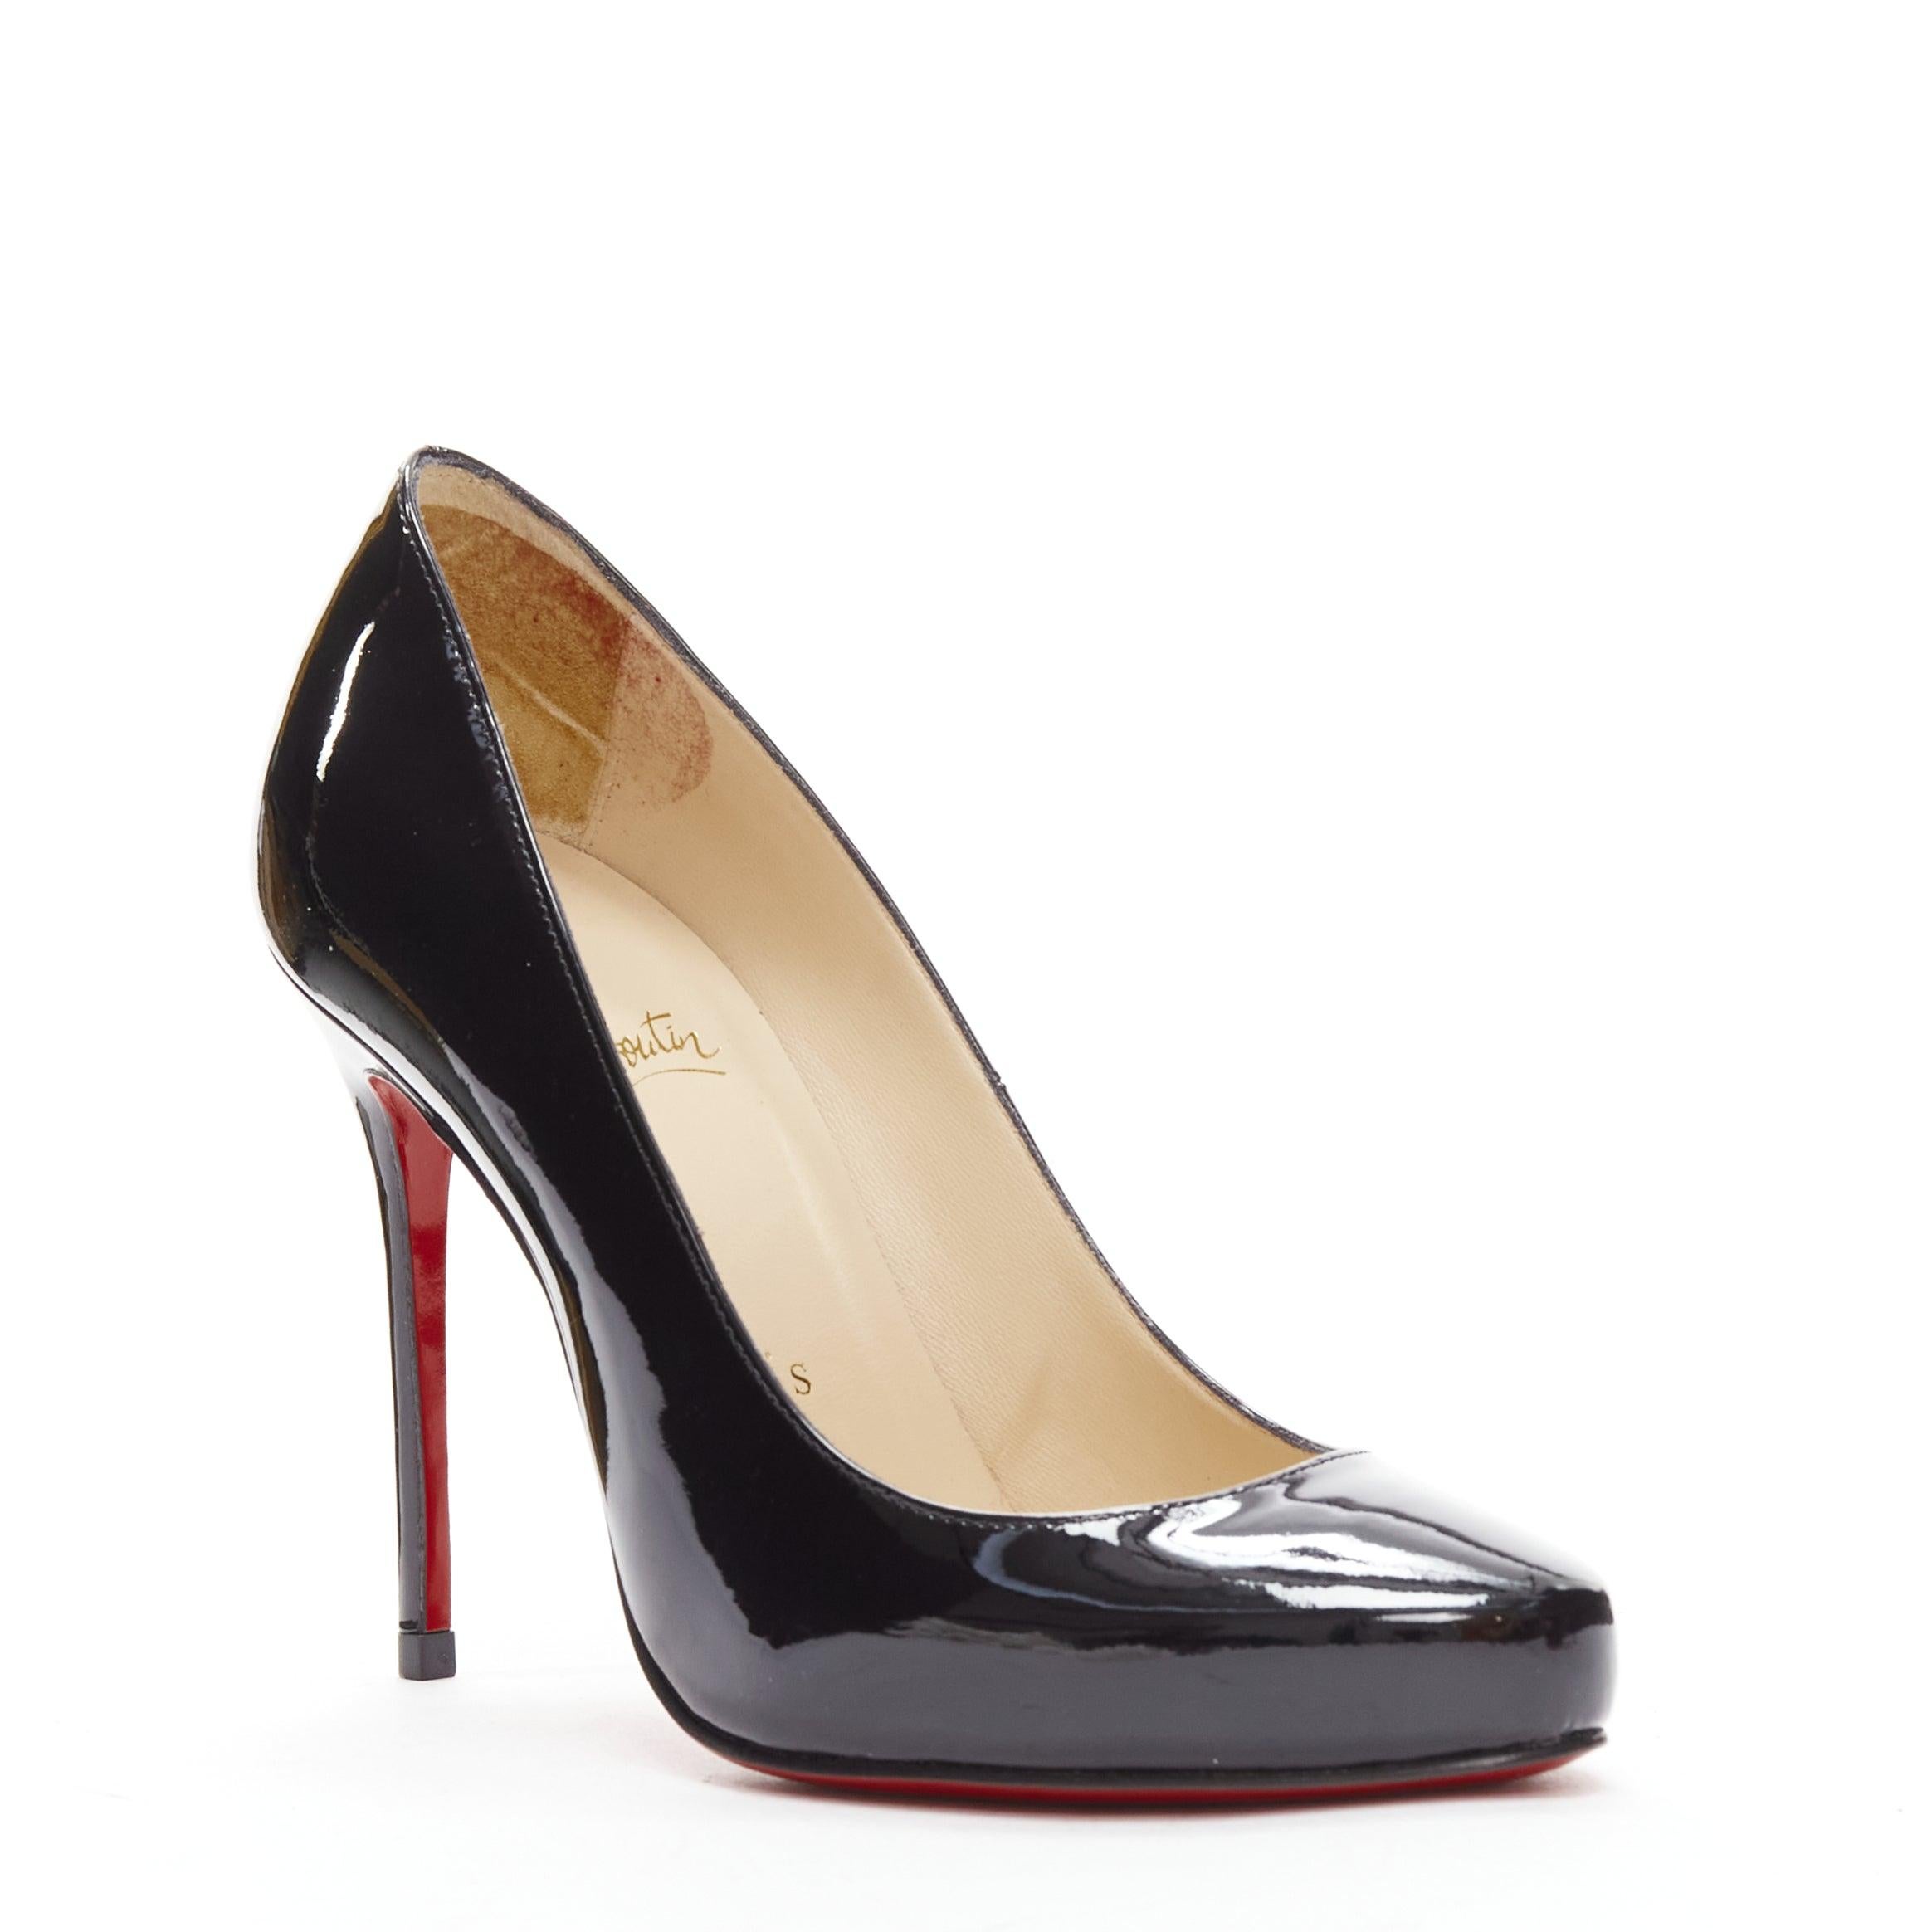 CHRISTIAN LOUBOUTIN Fifille 100 black patent leather classic pumps EU35.5
Reference: CELE/A00007
Brand: Christian Louboutin
Model: Fifille 100
Material: Patent Leather
Color: Black
Pattern: Solid
Closure: Slip On
Lining: Nude Leather
Made in: